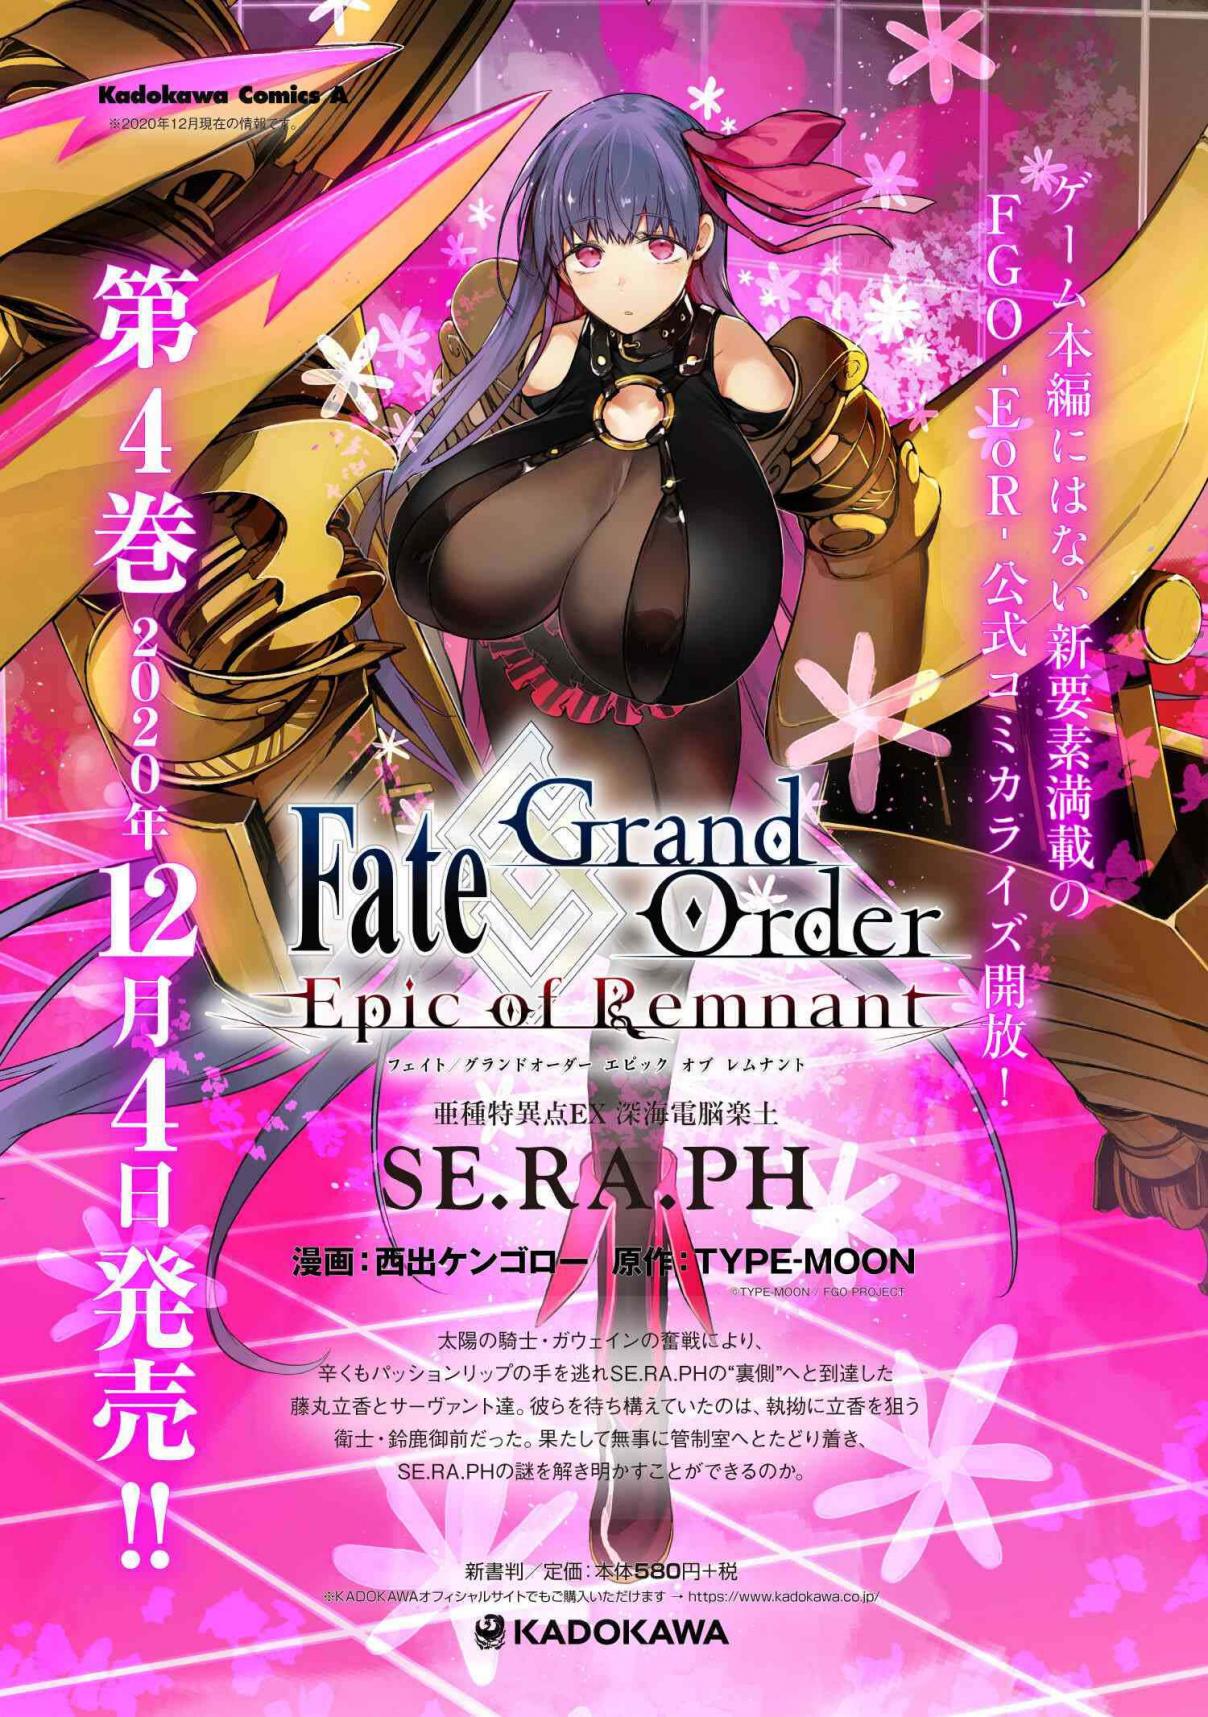 Fate/Grand Order -Epic of Remnant- Deep Sea Cyber-Paradise, SE.RA.PH 22.3